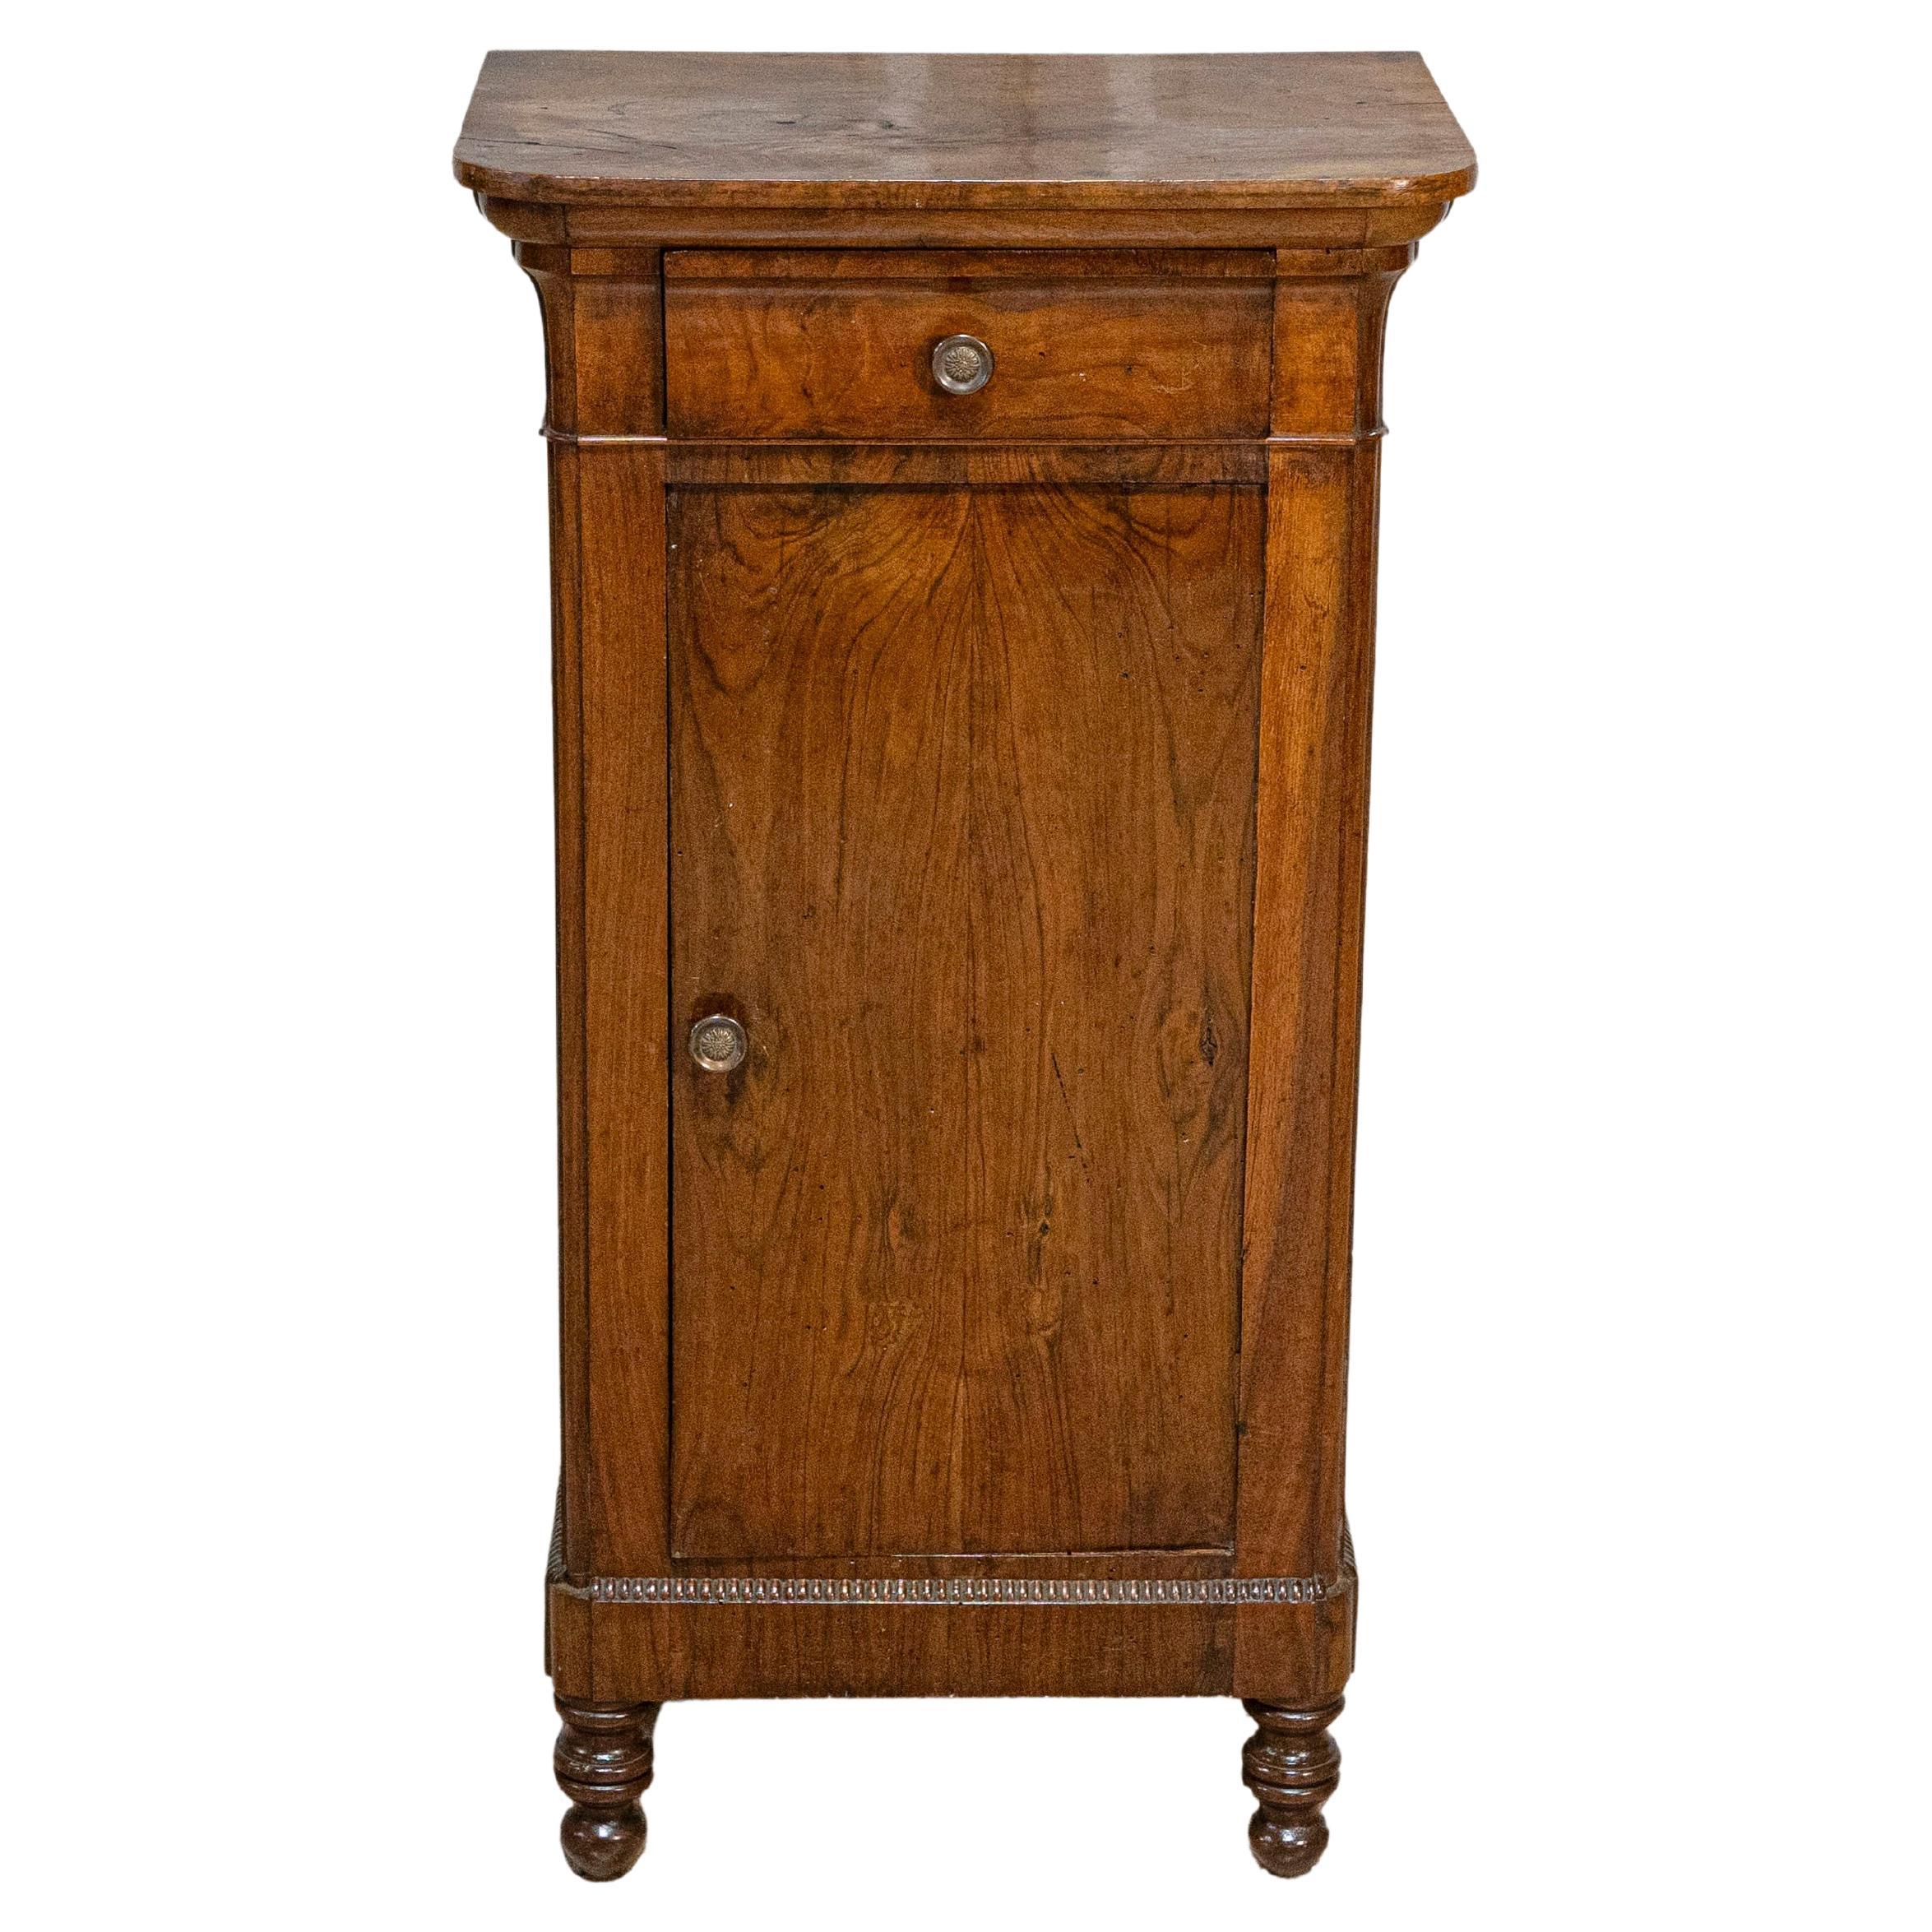 Italian 19th Century Walnut Bedside Table with Drawer over Door, Carved Motifs